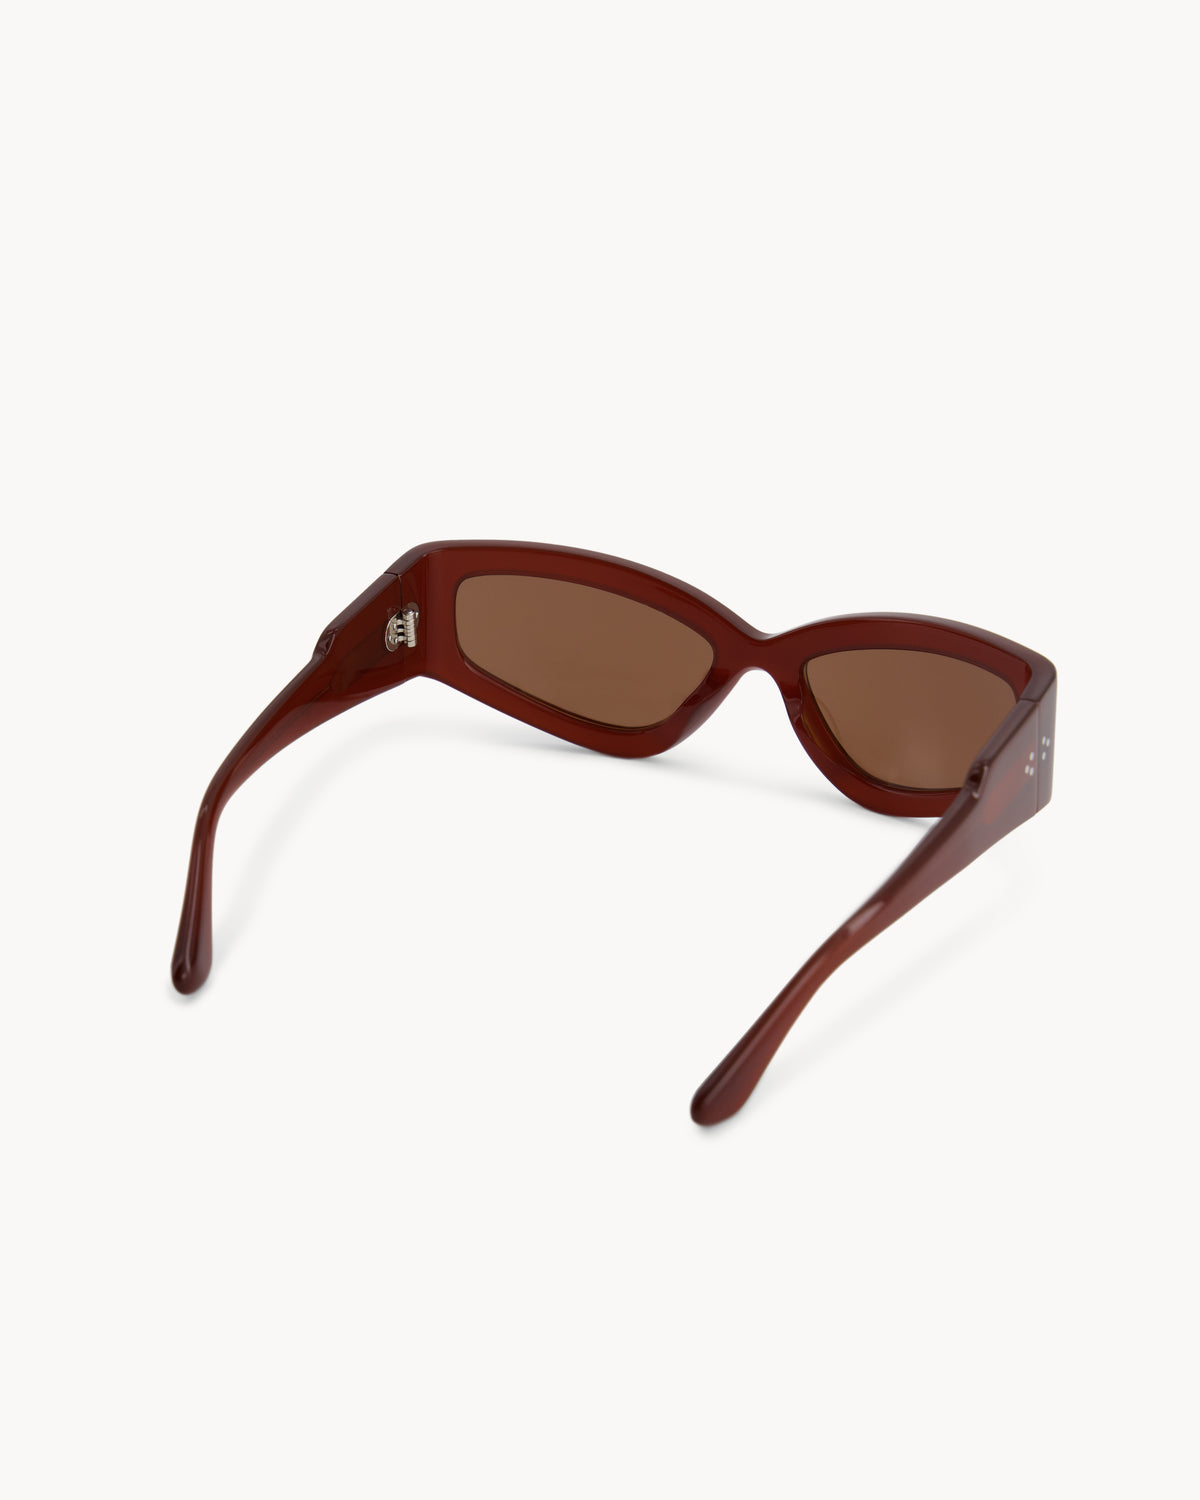 Port Tanger Shyan Sunglasses in Terracotta Acetate and Tobacco Lenses 3